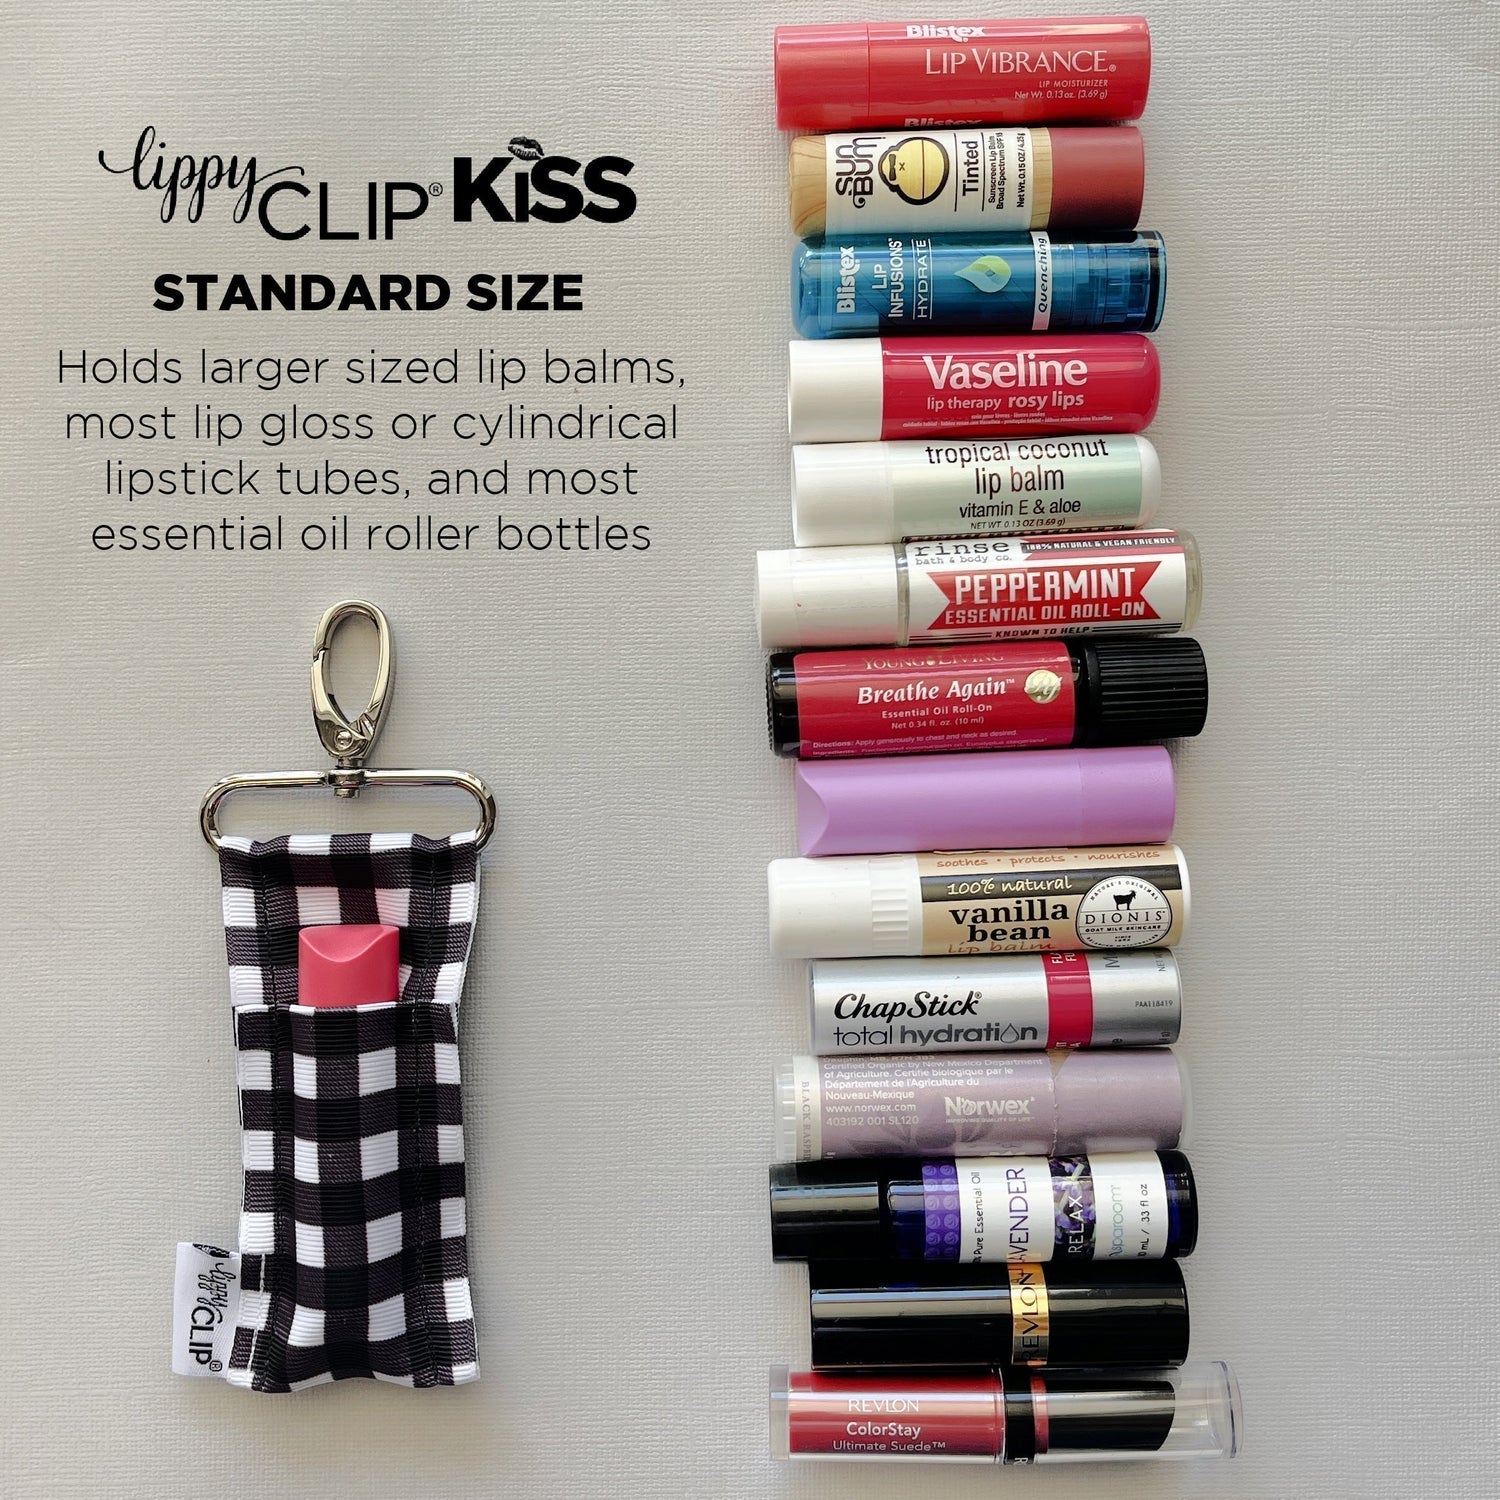 Tie Dye LippyClipKISS for larger lip balms, essential oil rollers, and more